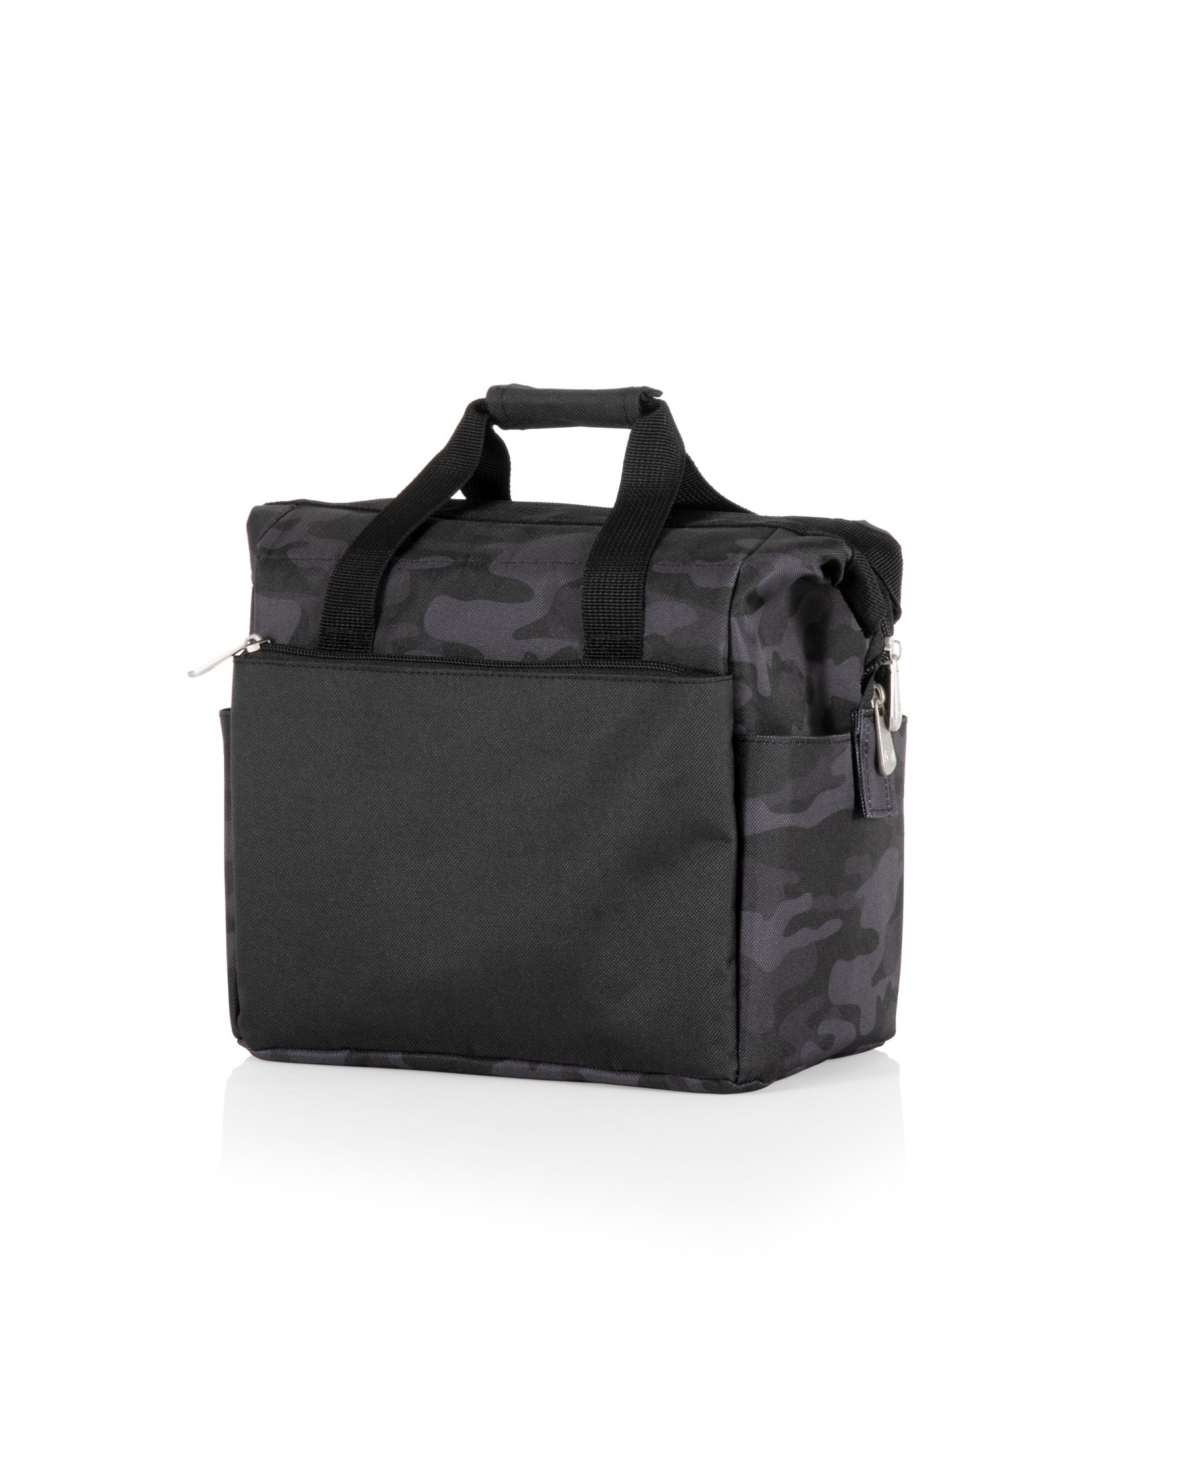 On The Go Lunch Cooler Bag - Black Camo